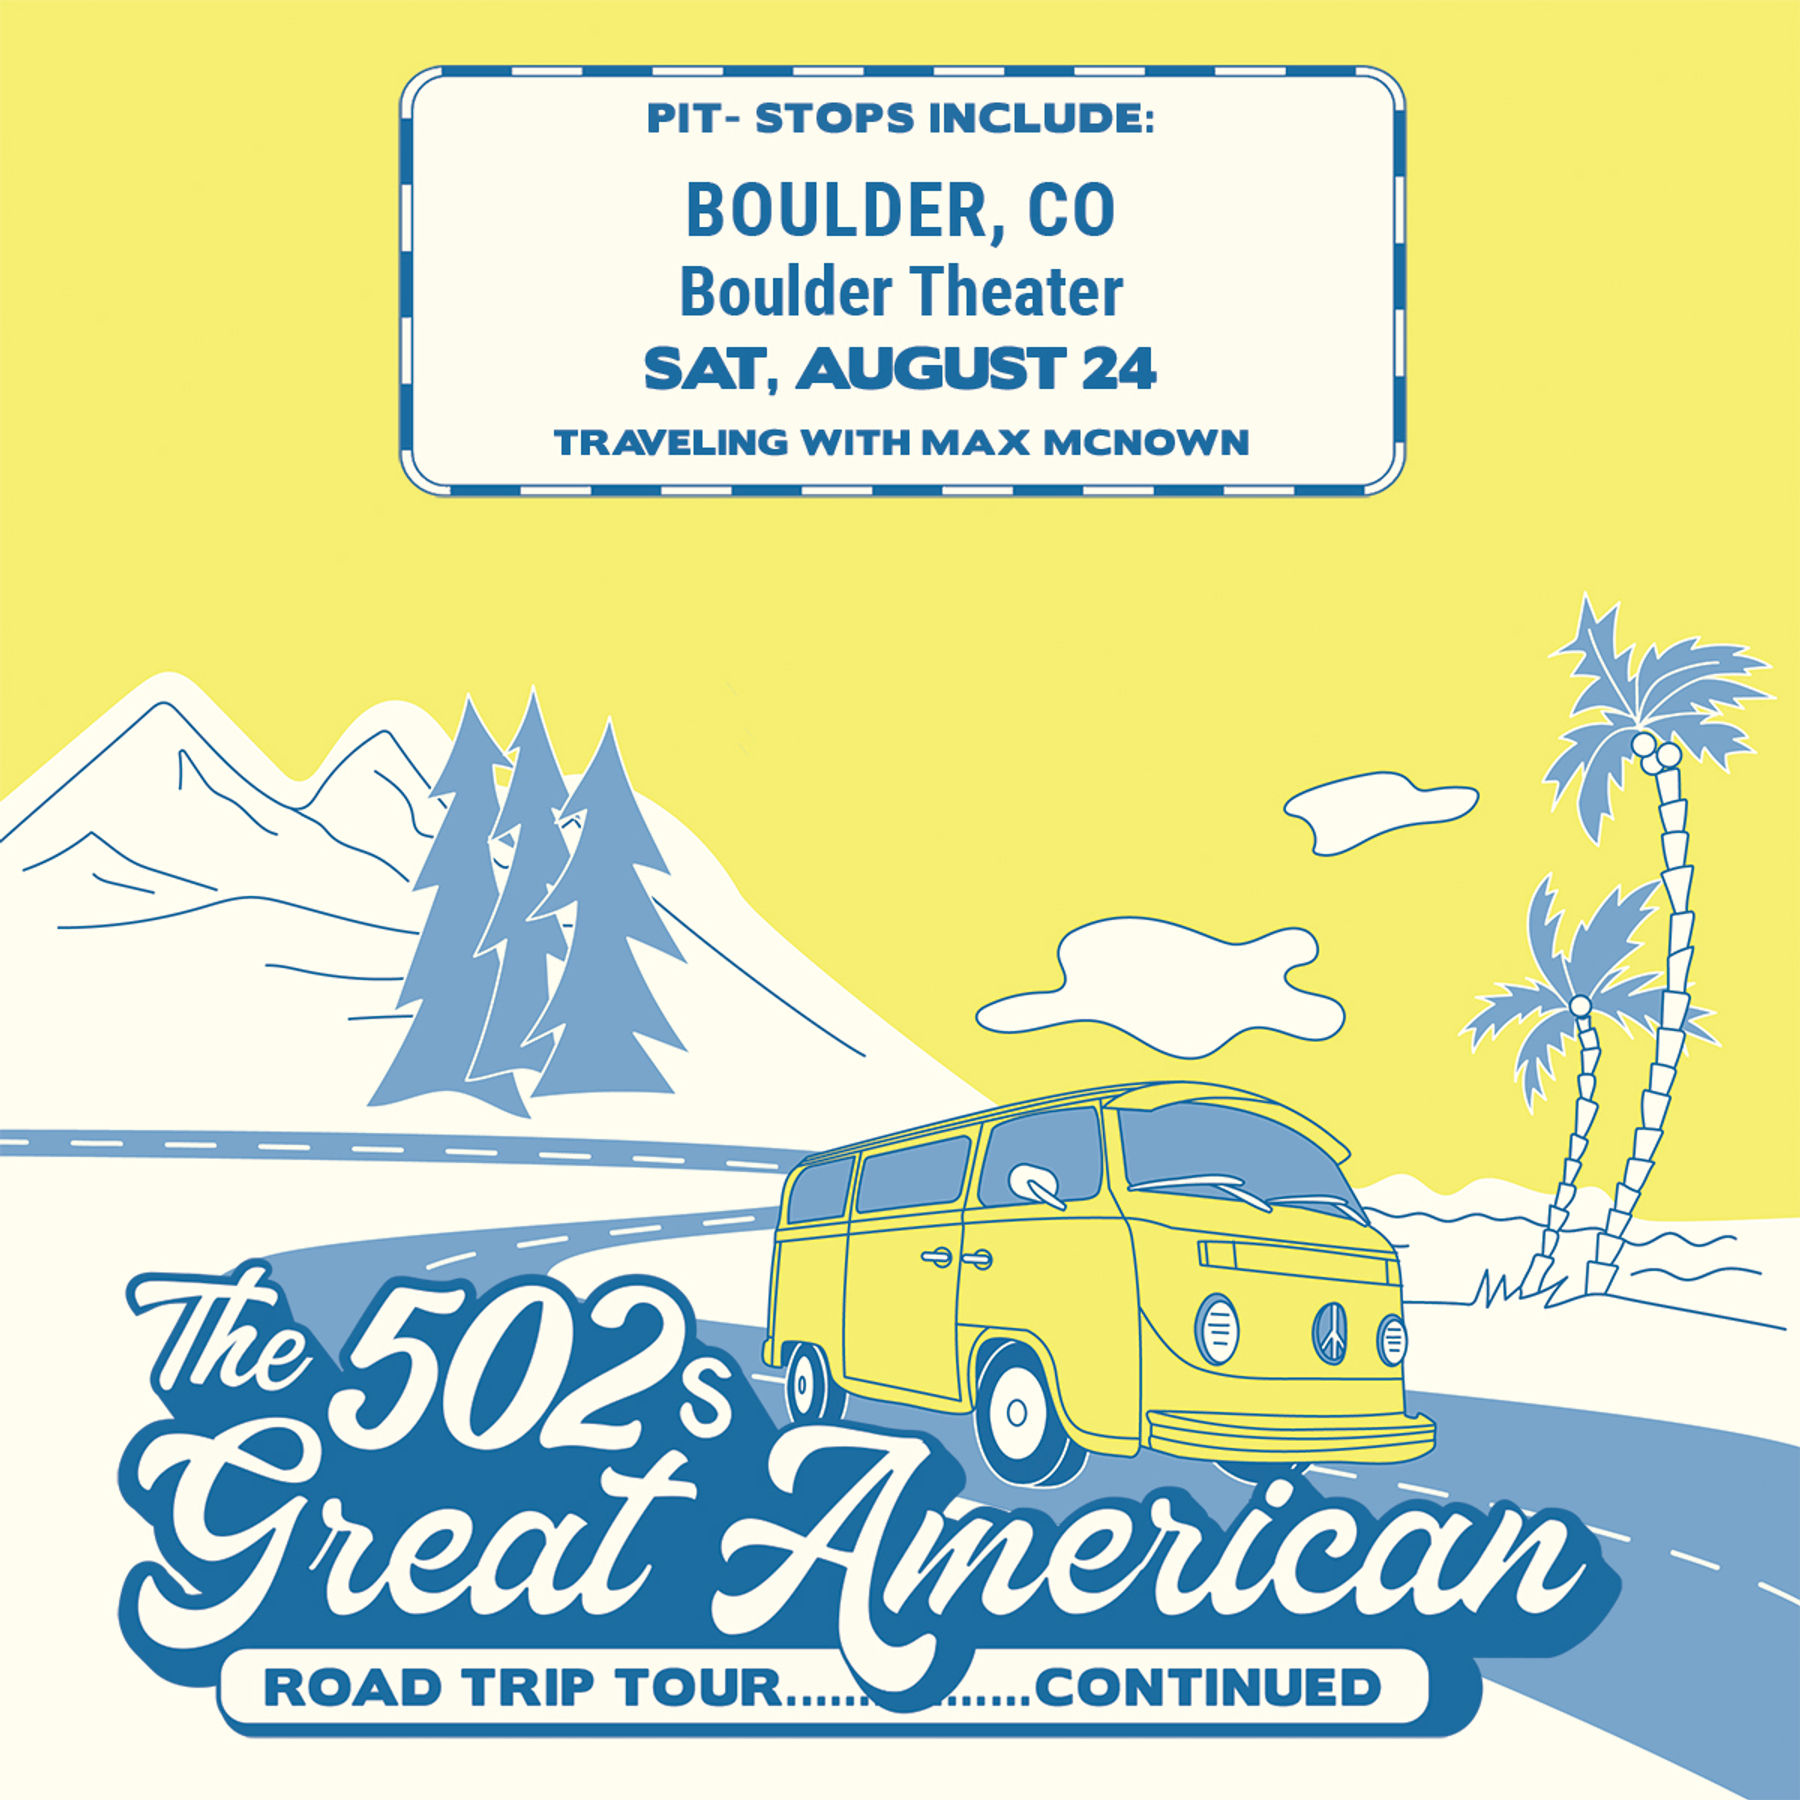 "Great American Road Trip The 502s with Max McNown"